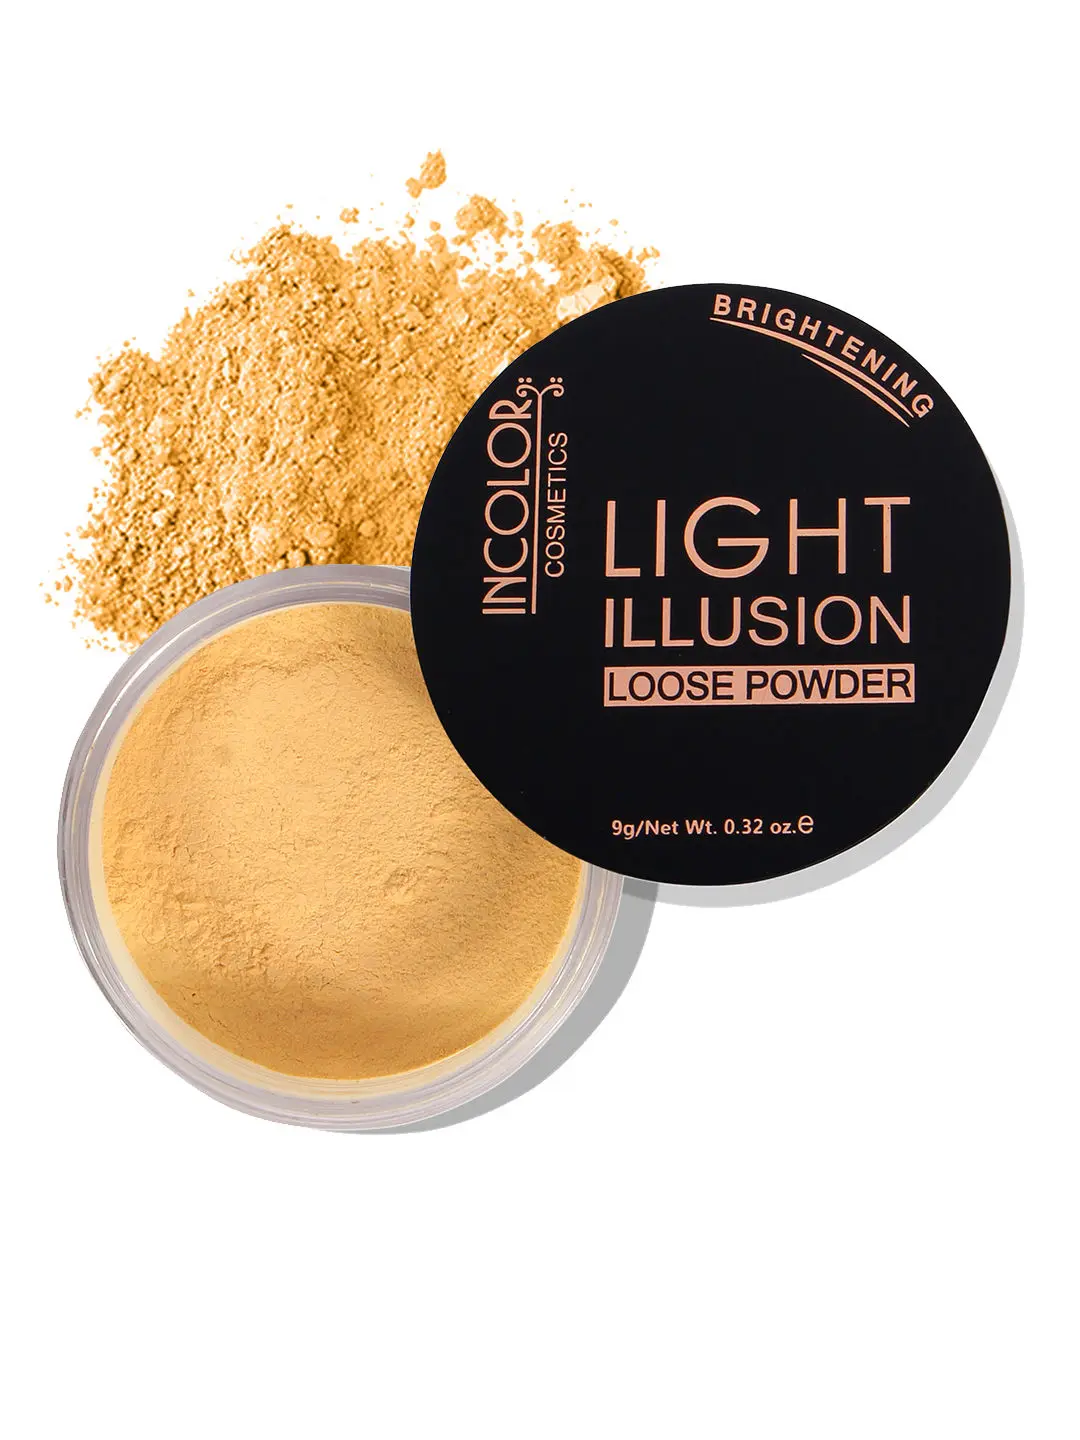 Incolor Brightening Illusion Loose Powder 06 IVORY 9 Gms